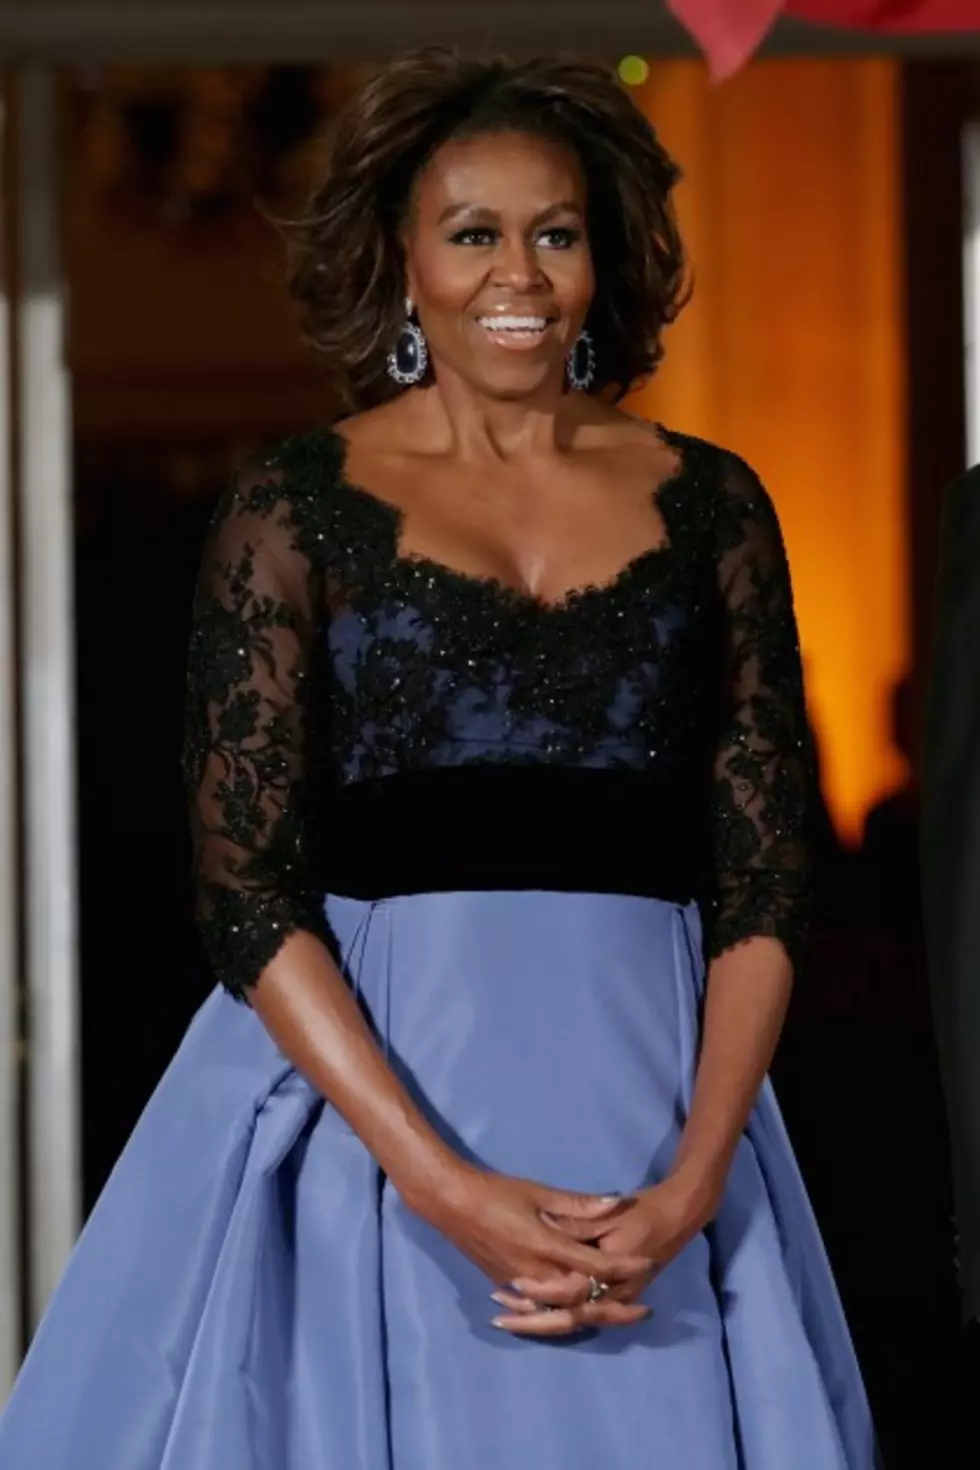 First Lady Two Day Hotel Stay In China Cost Us $222,000